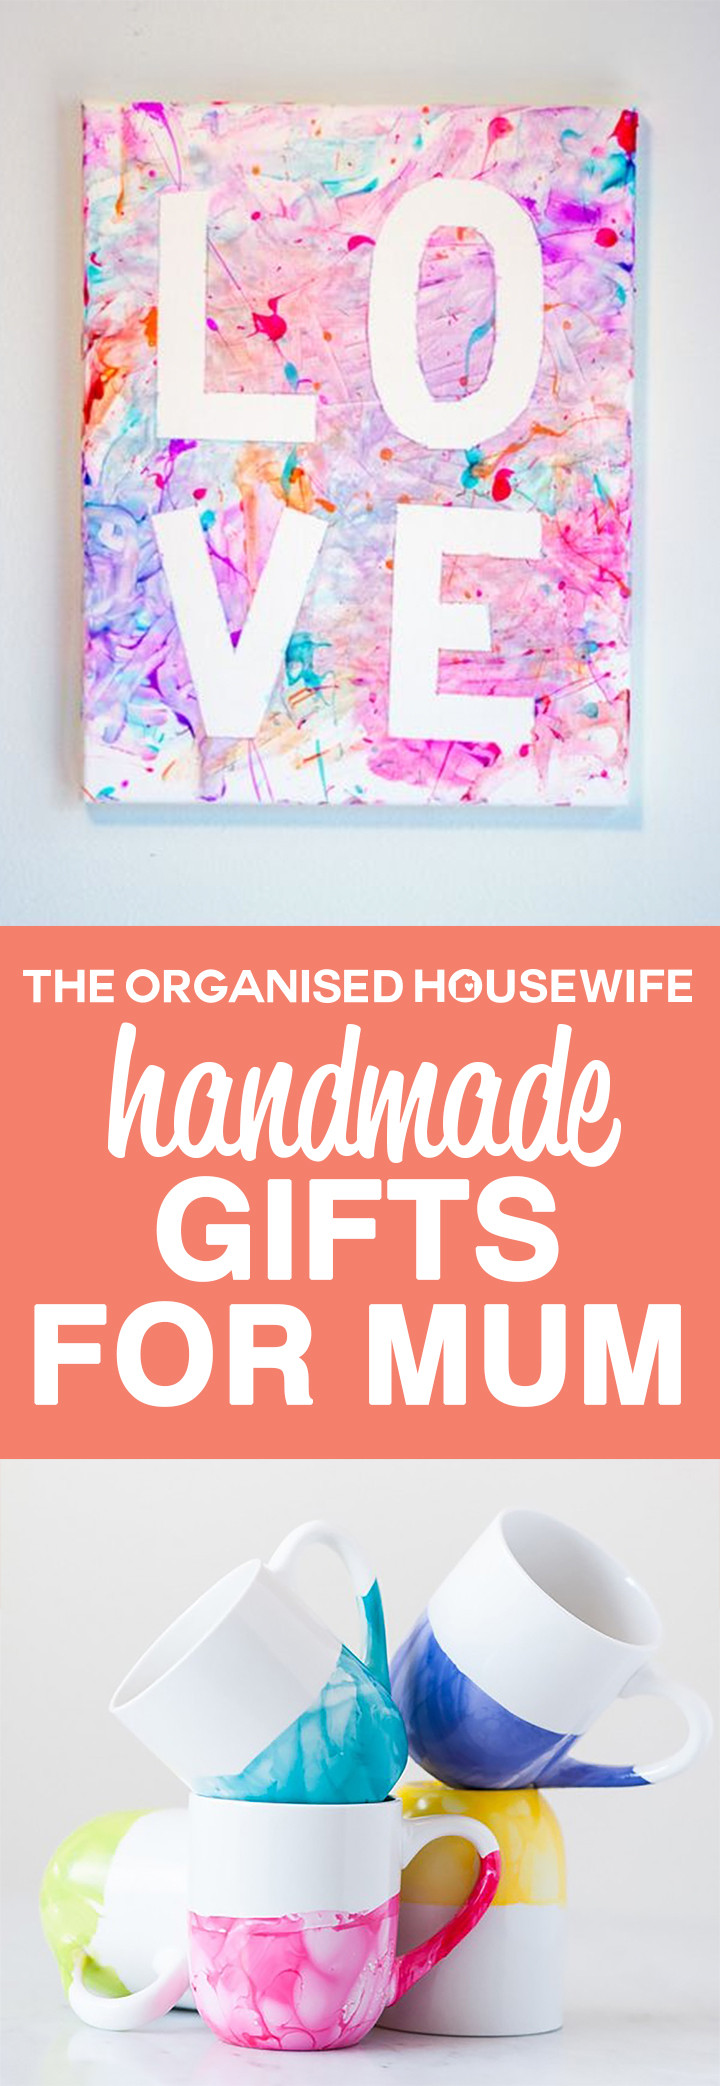 Homemade Birthday Gifts For Mom From Kids
 9 Handmade Gifts for Mum The Organised Housewife